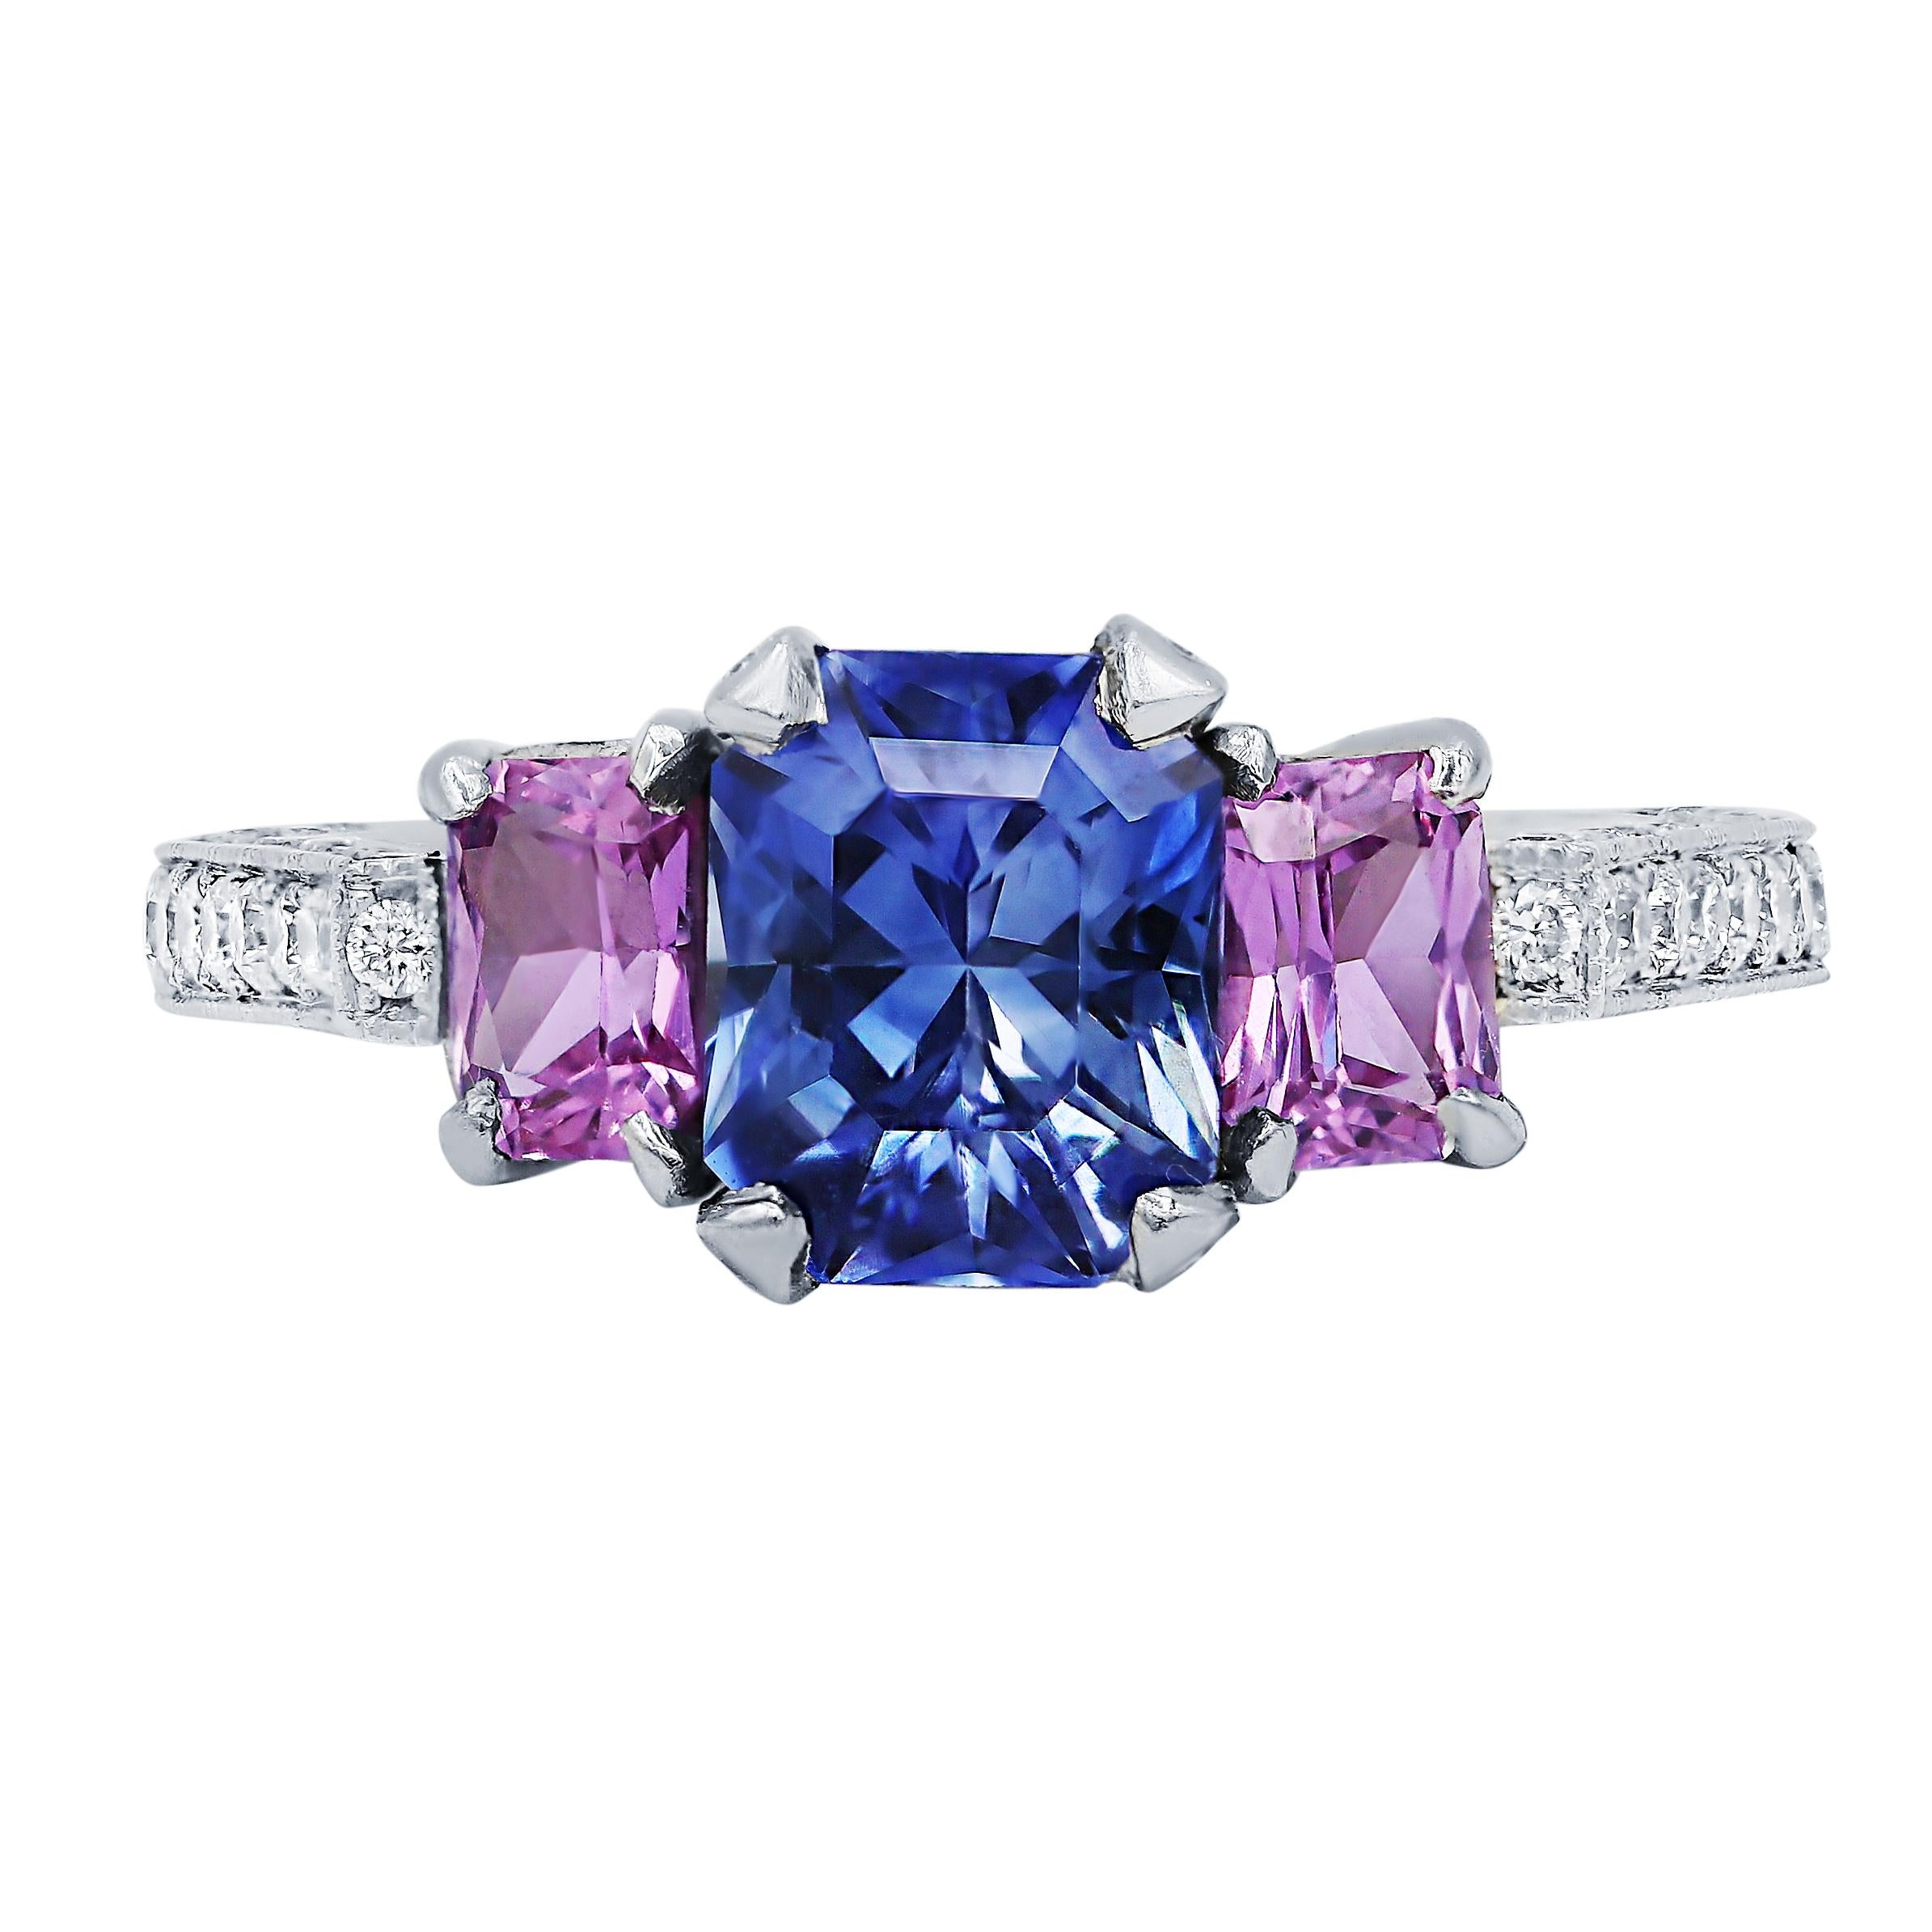 Platinum sapphire and diamond ring featuring a center 1.84 ct cushion cut blue sapphire with 2 pink oval sapphires on the side totaling 0.72 cts  with 1.00 cts tw of diamonds.
Diana M. is a leading supplier of top-quality fine jewelry for over 35